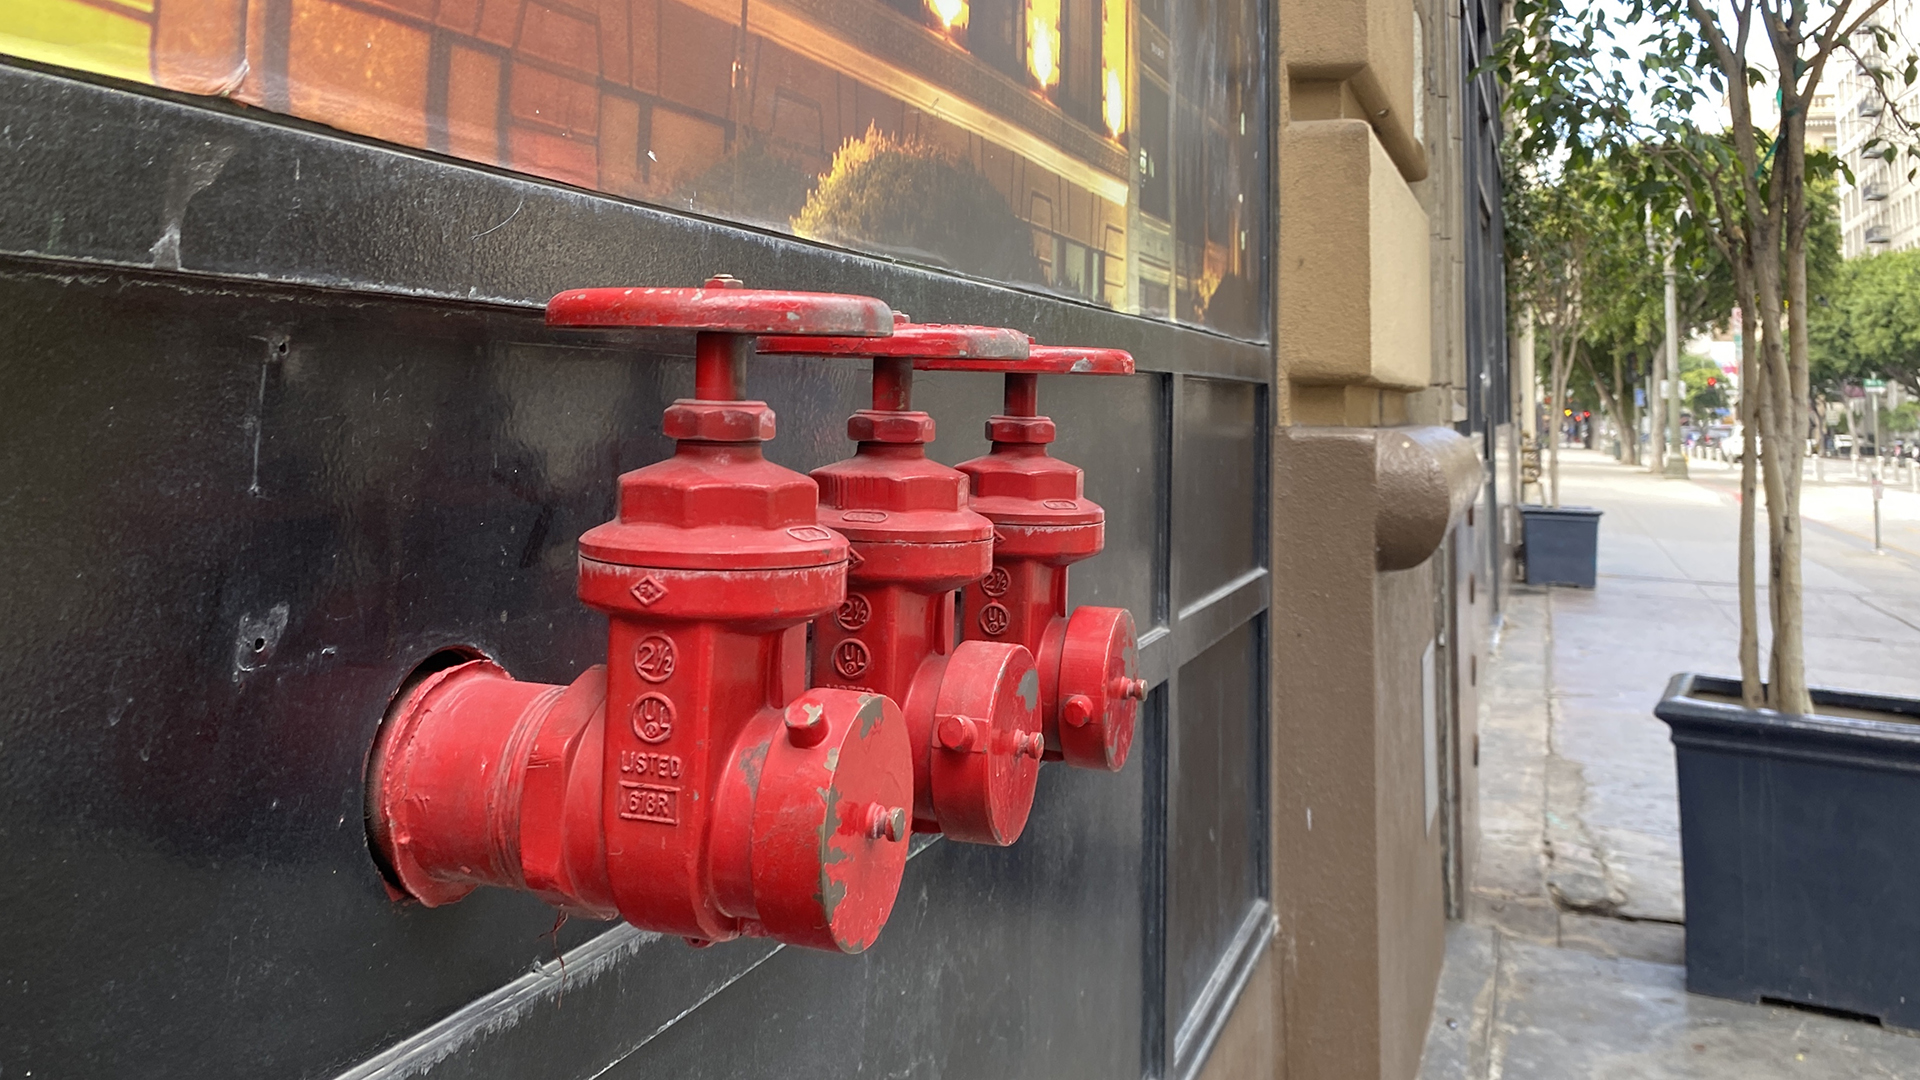 Red standpipes for fire dept to access a sprinkler system in Downtown LA